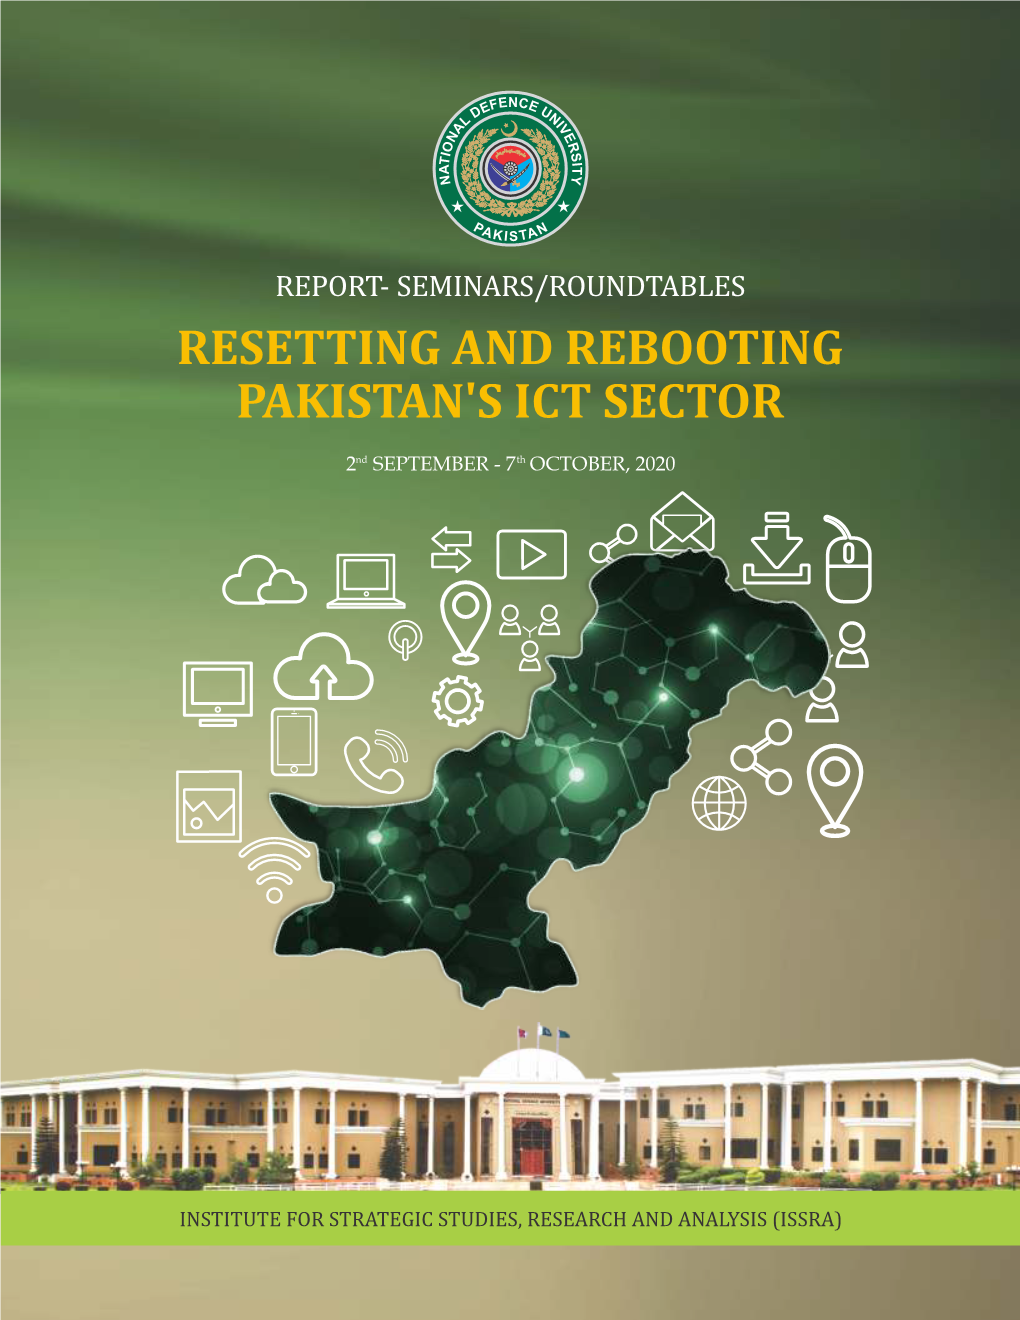 Seminar on Resetting and Rebooting Pakistan's IT Sector